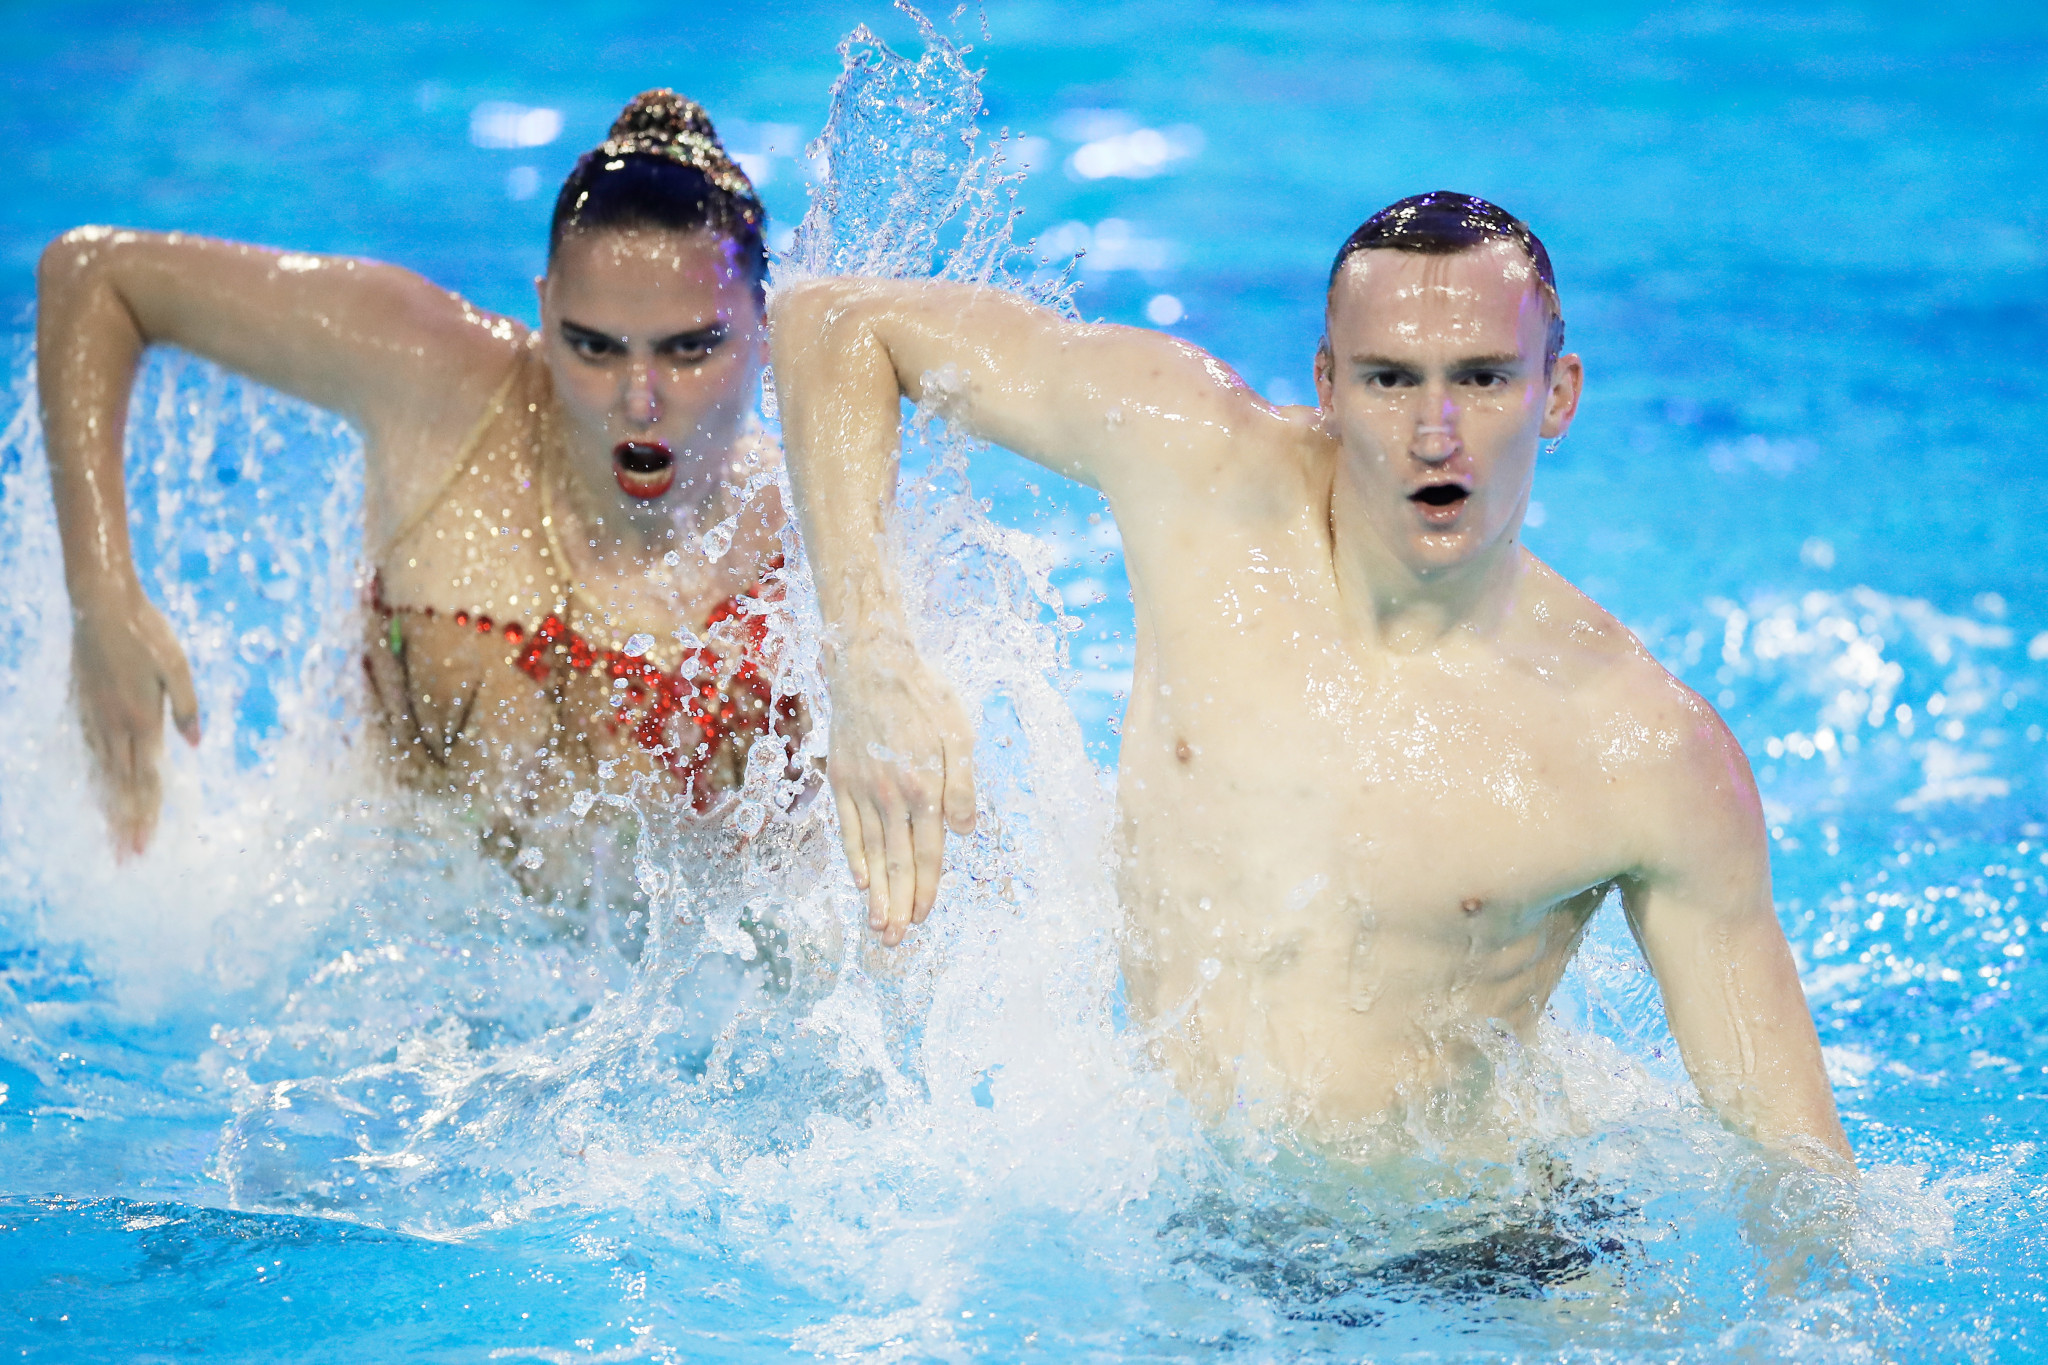 Mayya Gurbanberdieva, left, and Aleksandr Maltsev, right, took gold in the mixed duet technical event as Russia won four of the five events contested in the first leg of the FINA Artistic Swimming World Series ©Getty Images